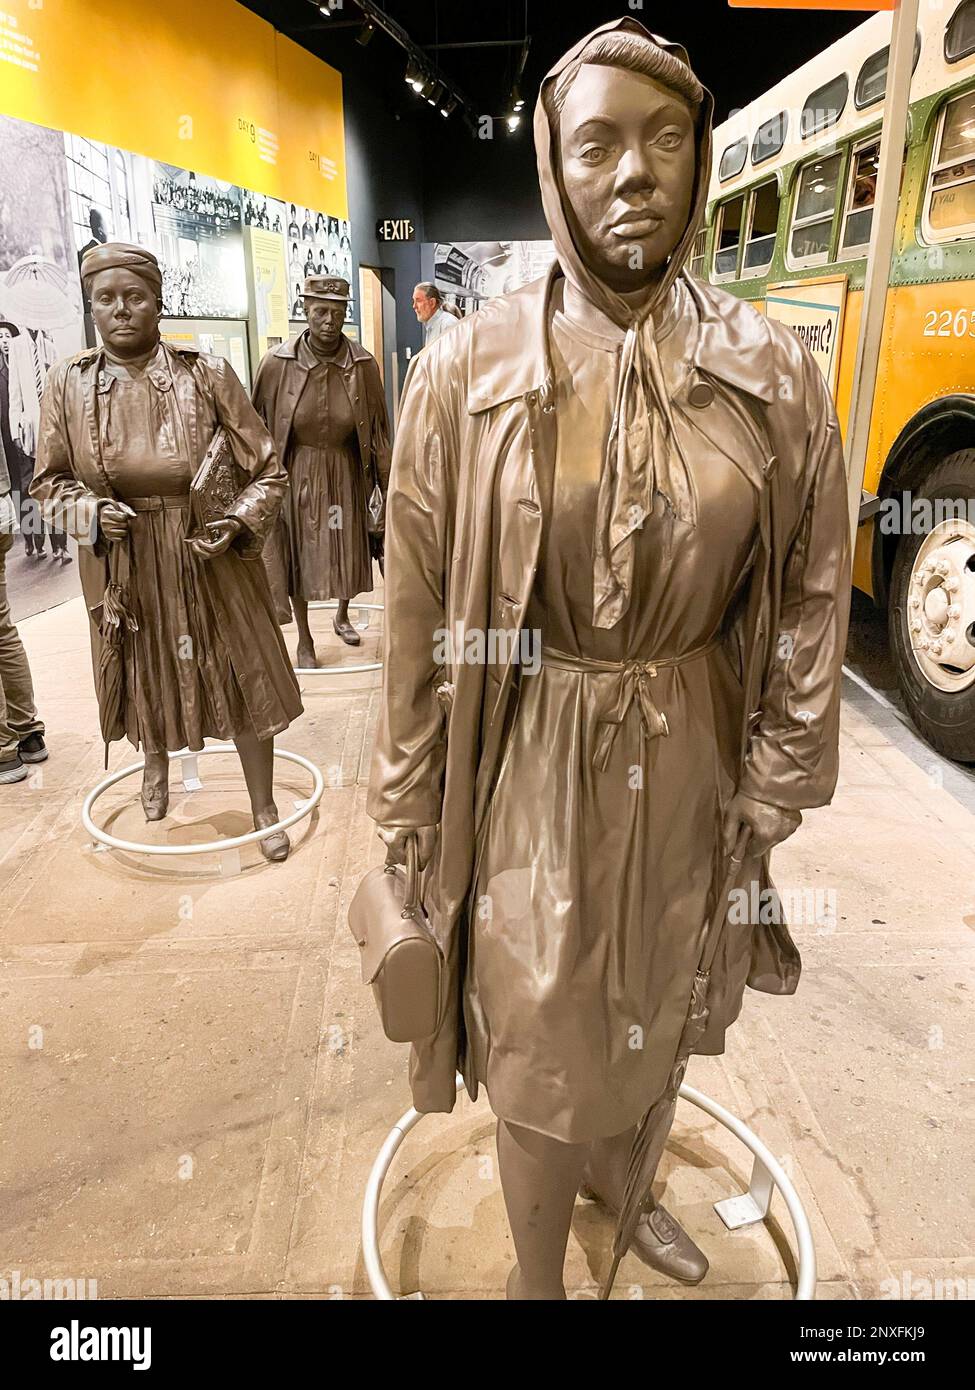 Interior of the National Civil Rights Museum, Lorraine Motel, Memphis, Tennessee, showing Montgomery Bus Boycott tribute, women walking. Stock Photo